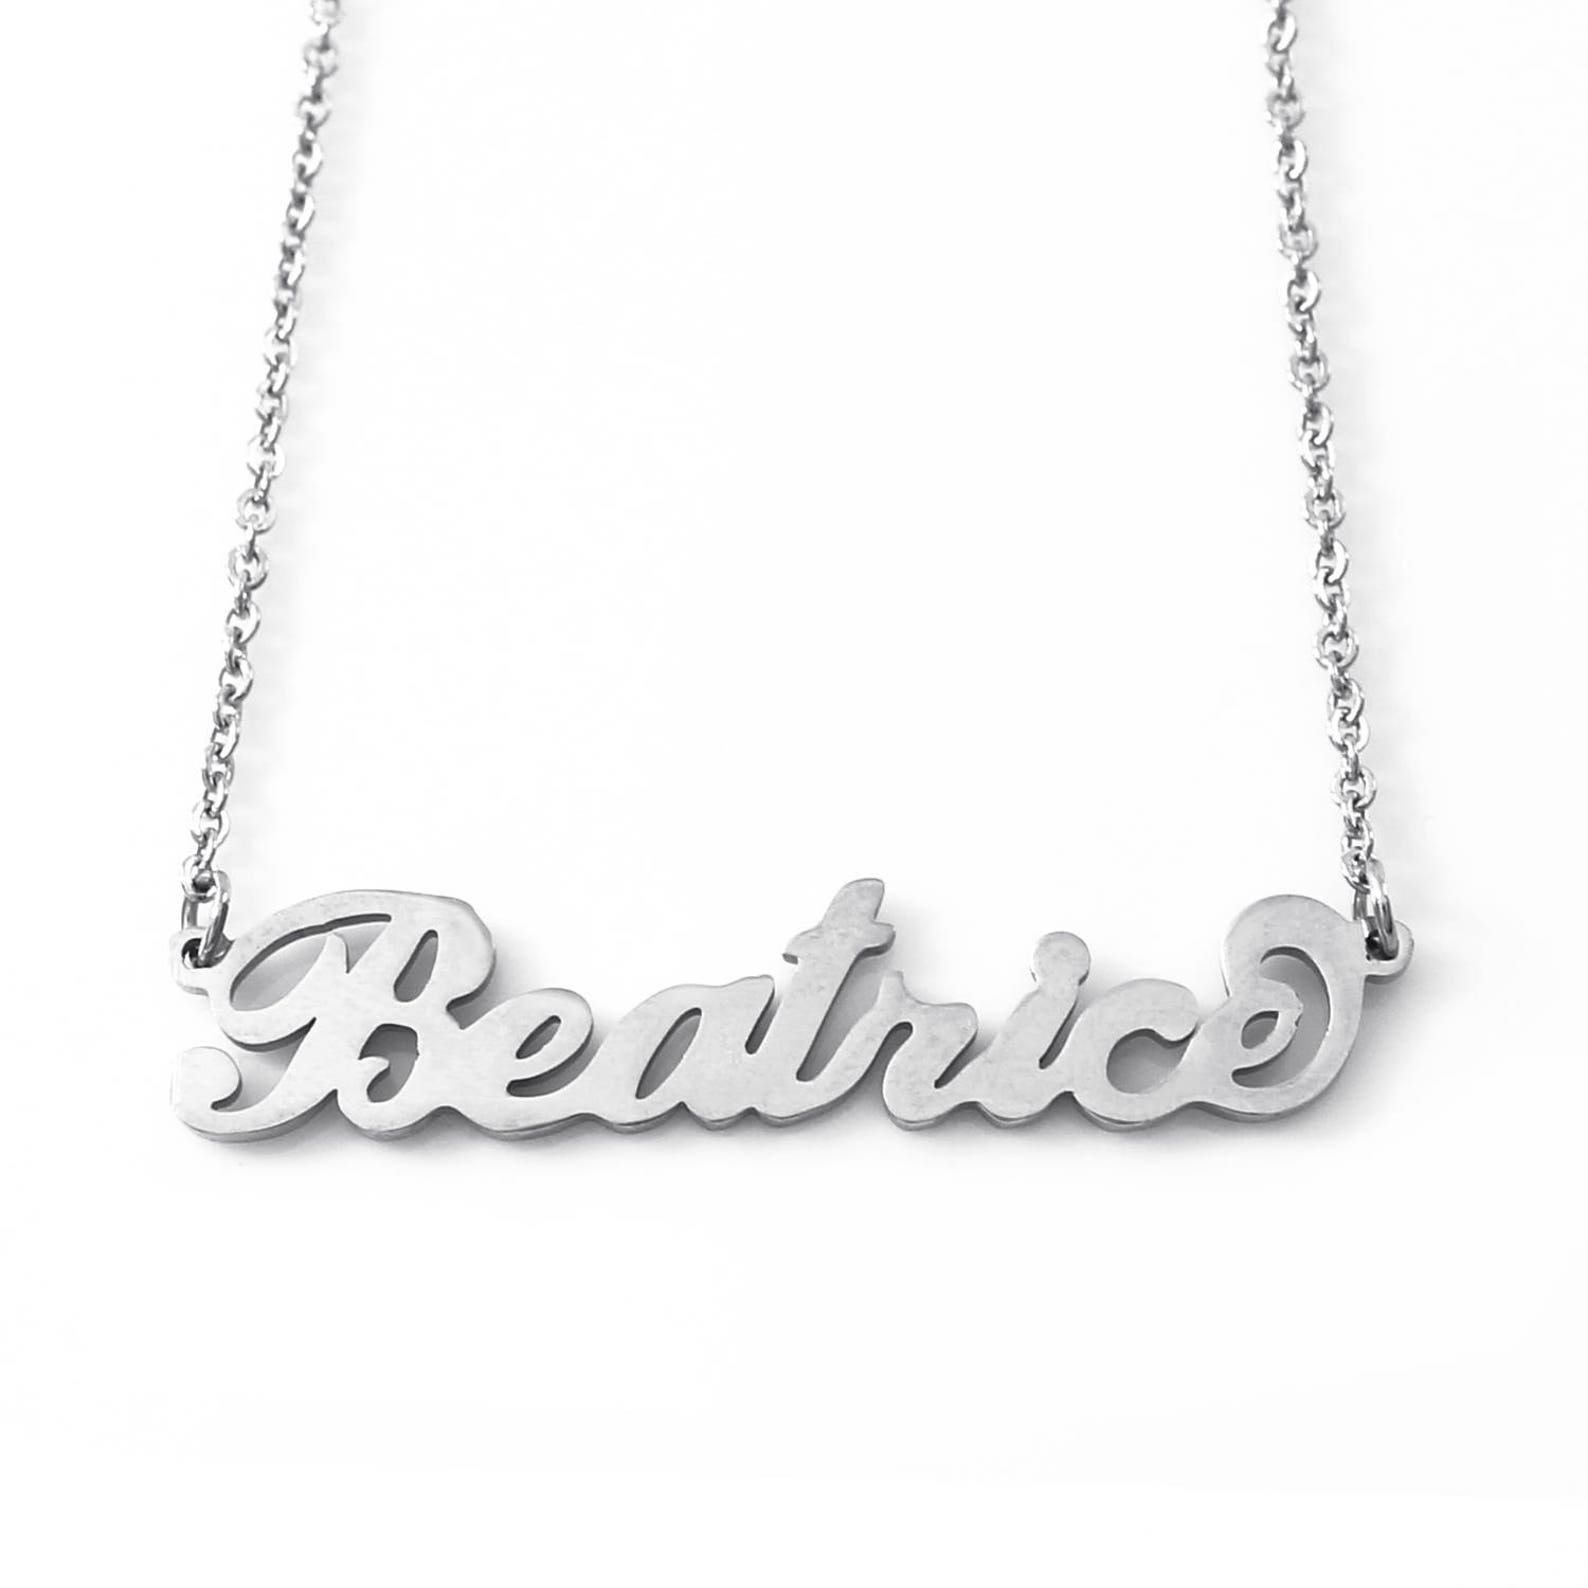 Beatrice Italic Silver Tone Name Necklace Personalized Etsy